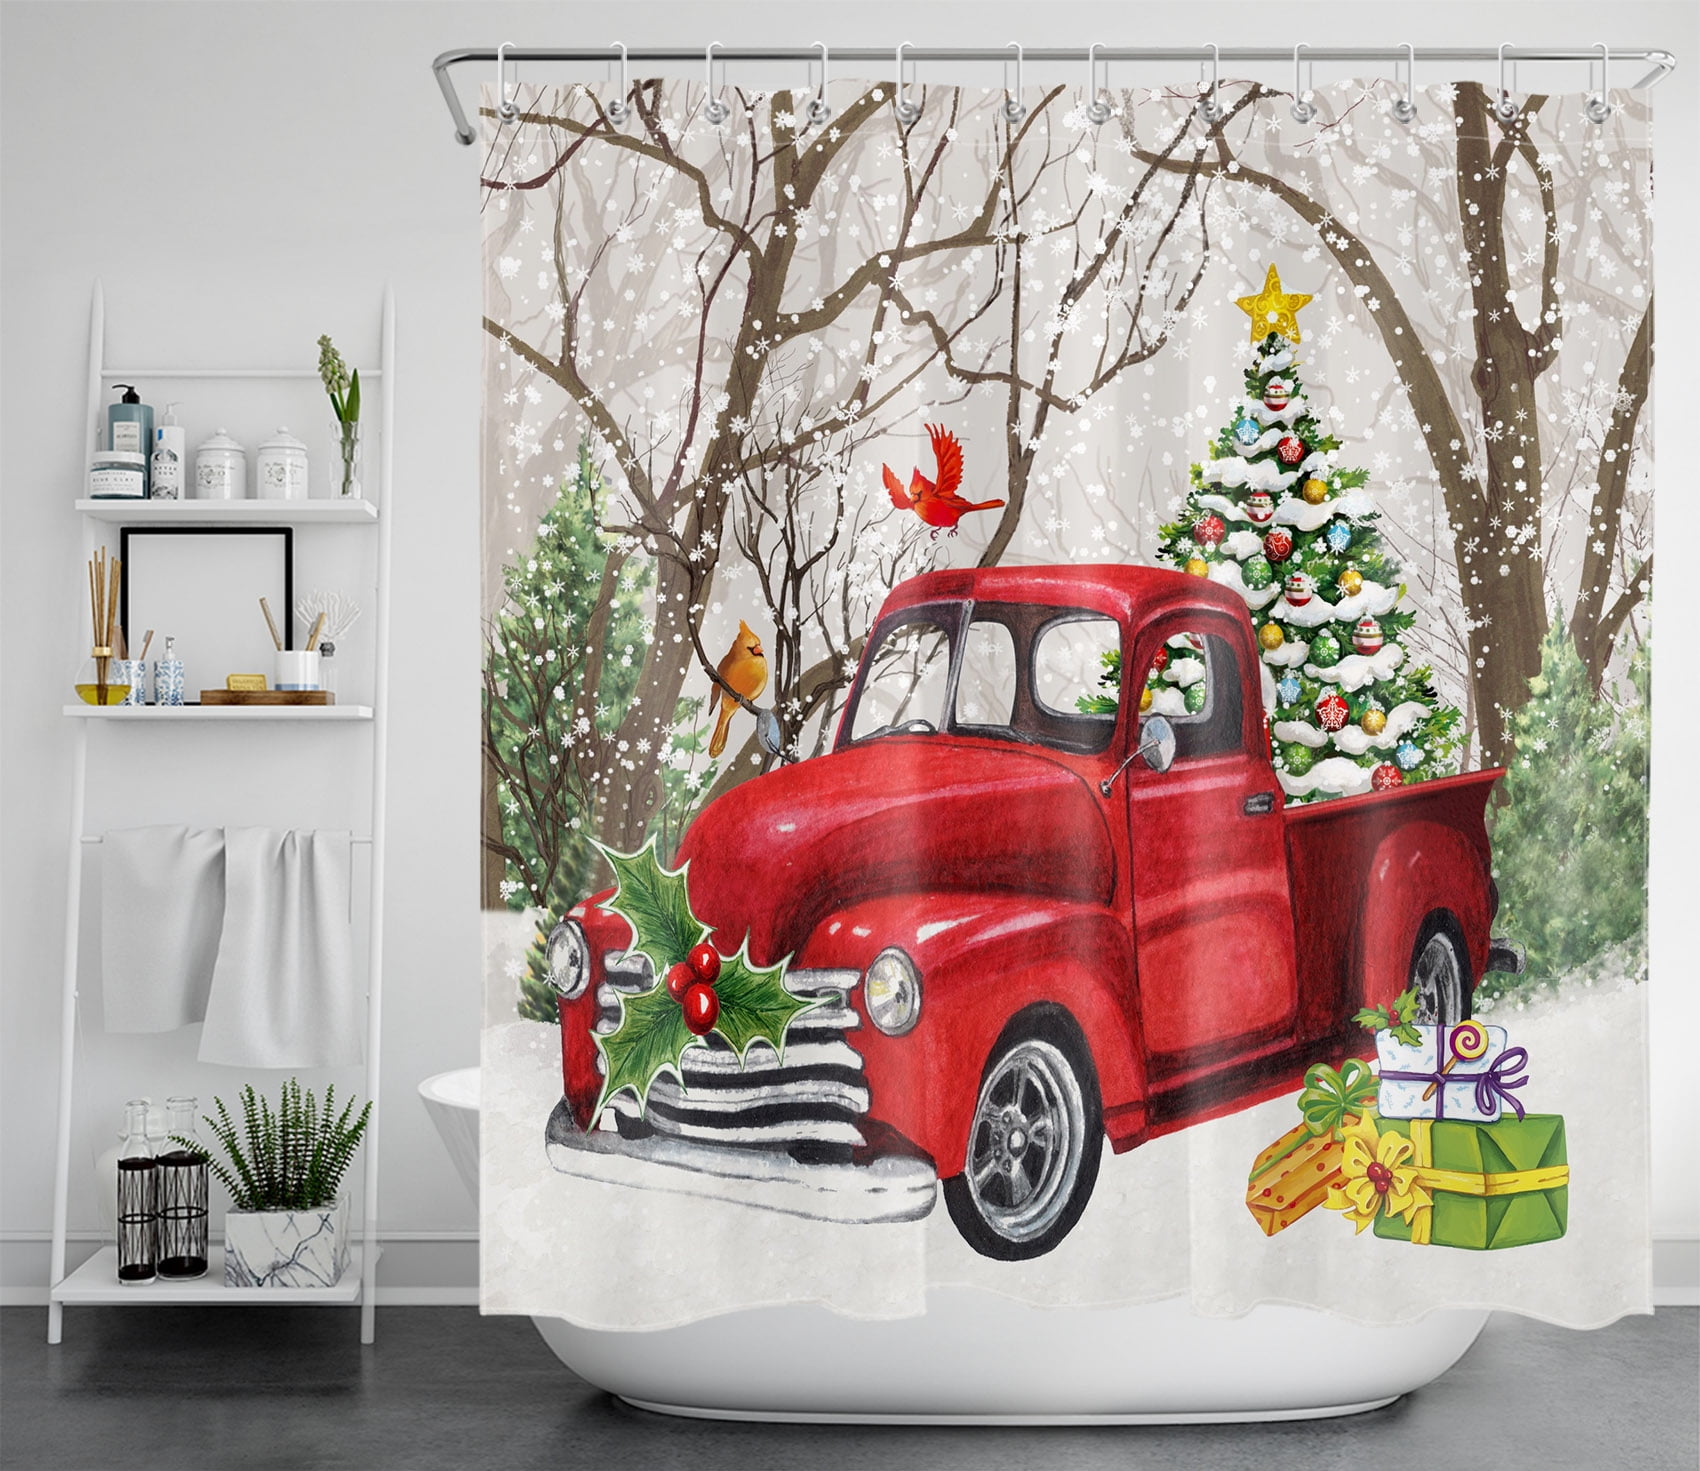 Details about   Red Christmas Hat Reindeer Shower Curtain Bathroom Decor Fabric 12hooks 71in 